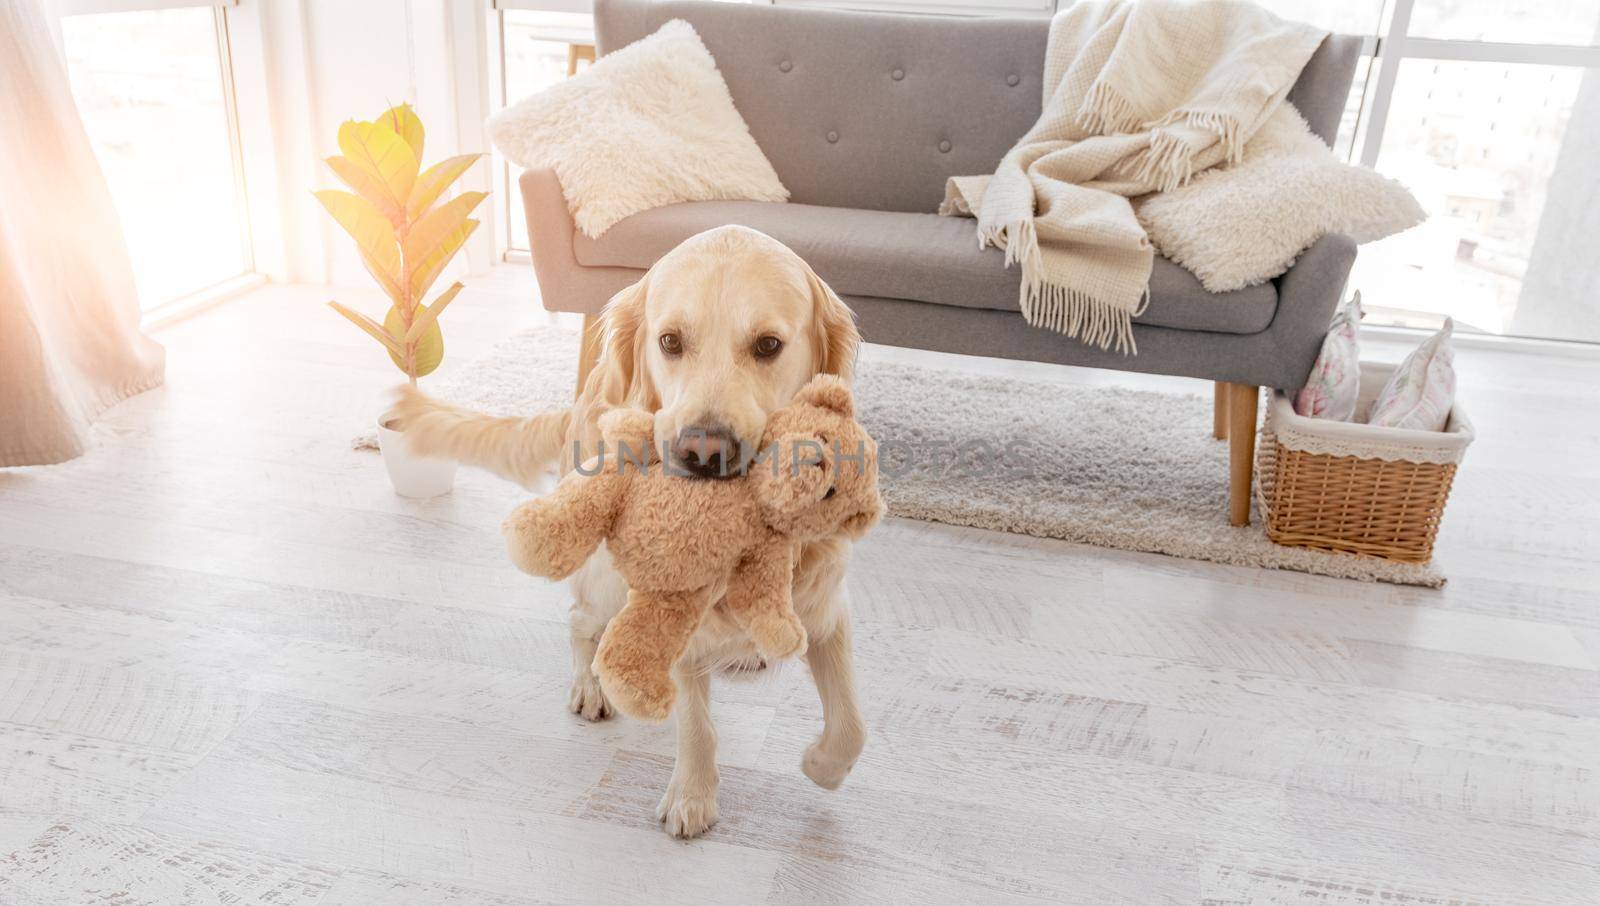 Golden retriever dog holding teddy bear toy in her teeth and staying in the room with sunlight